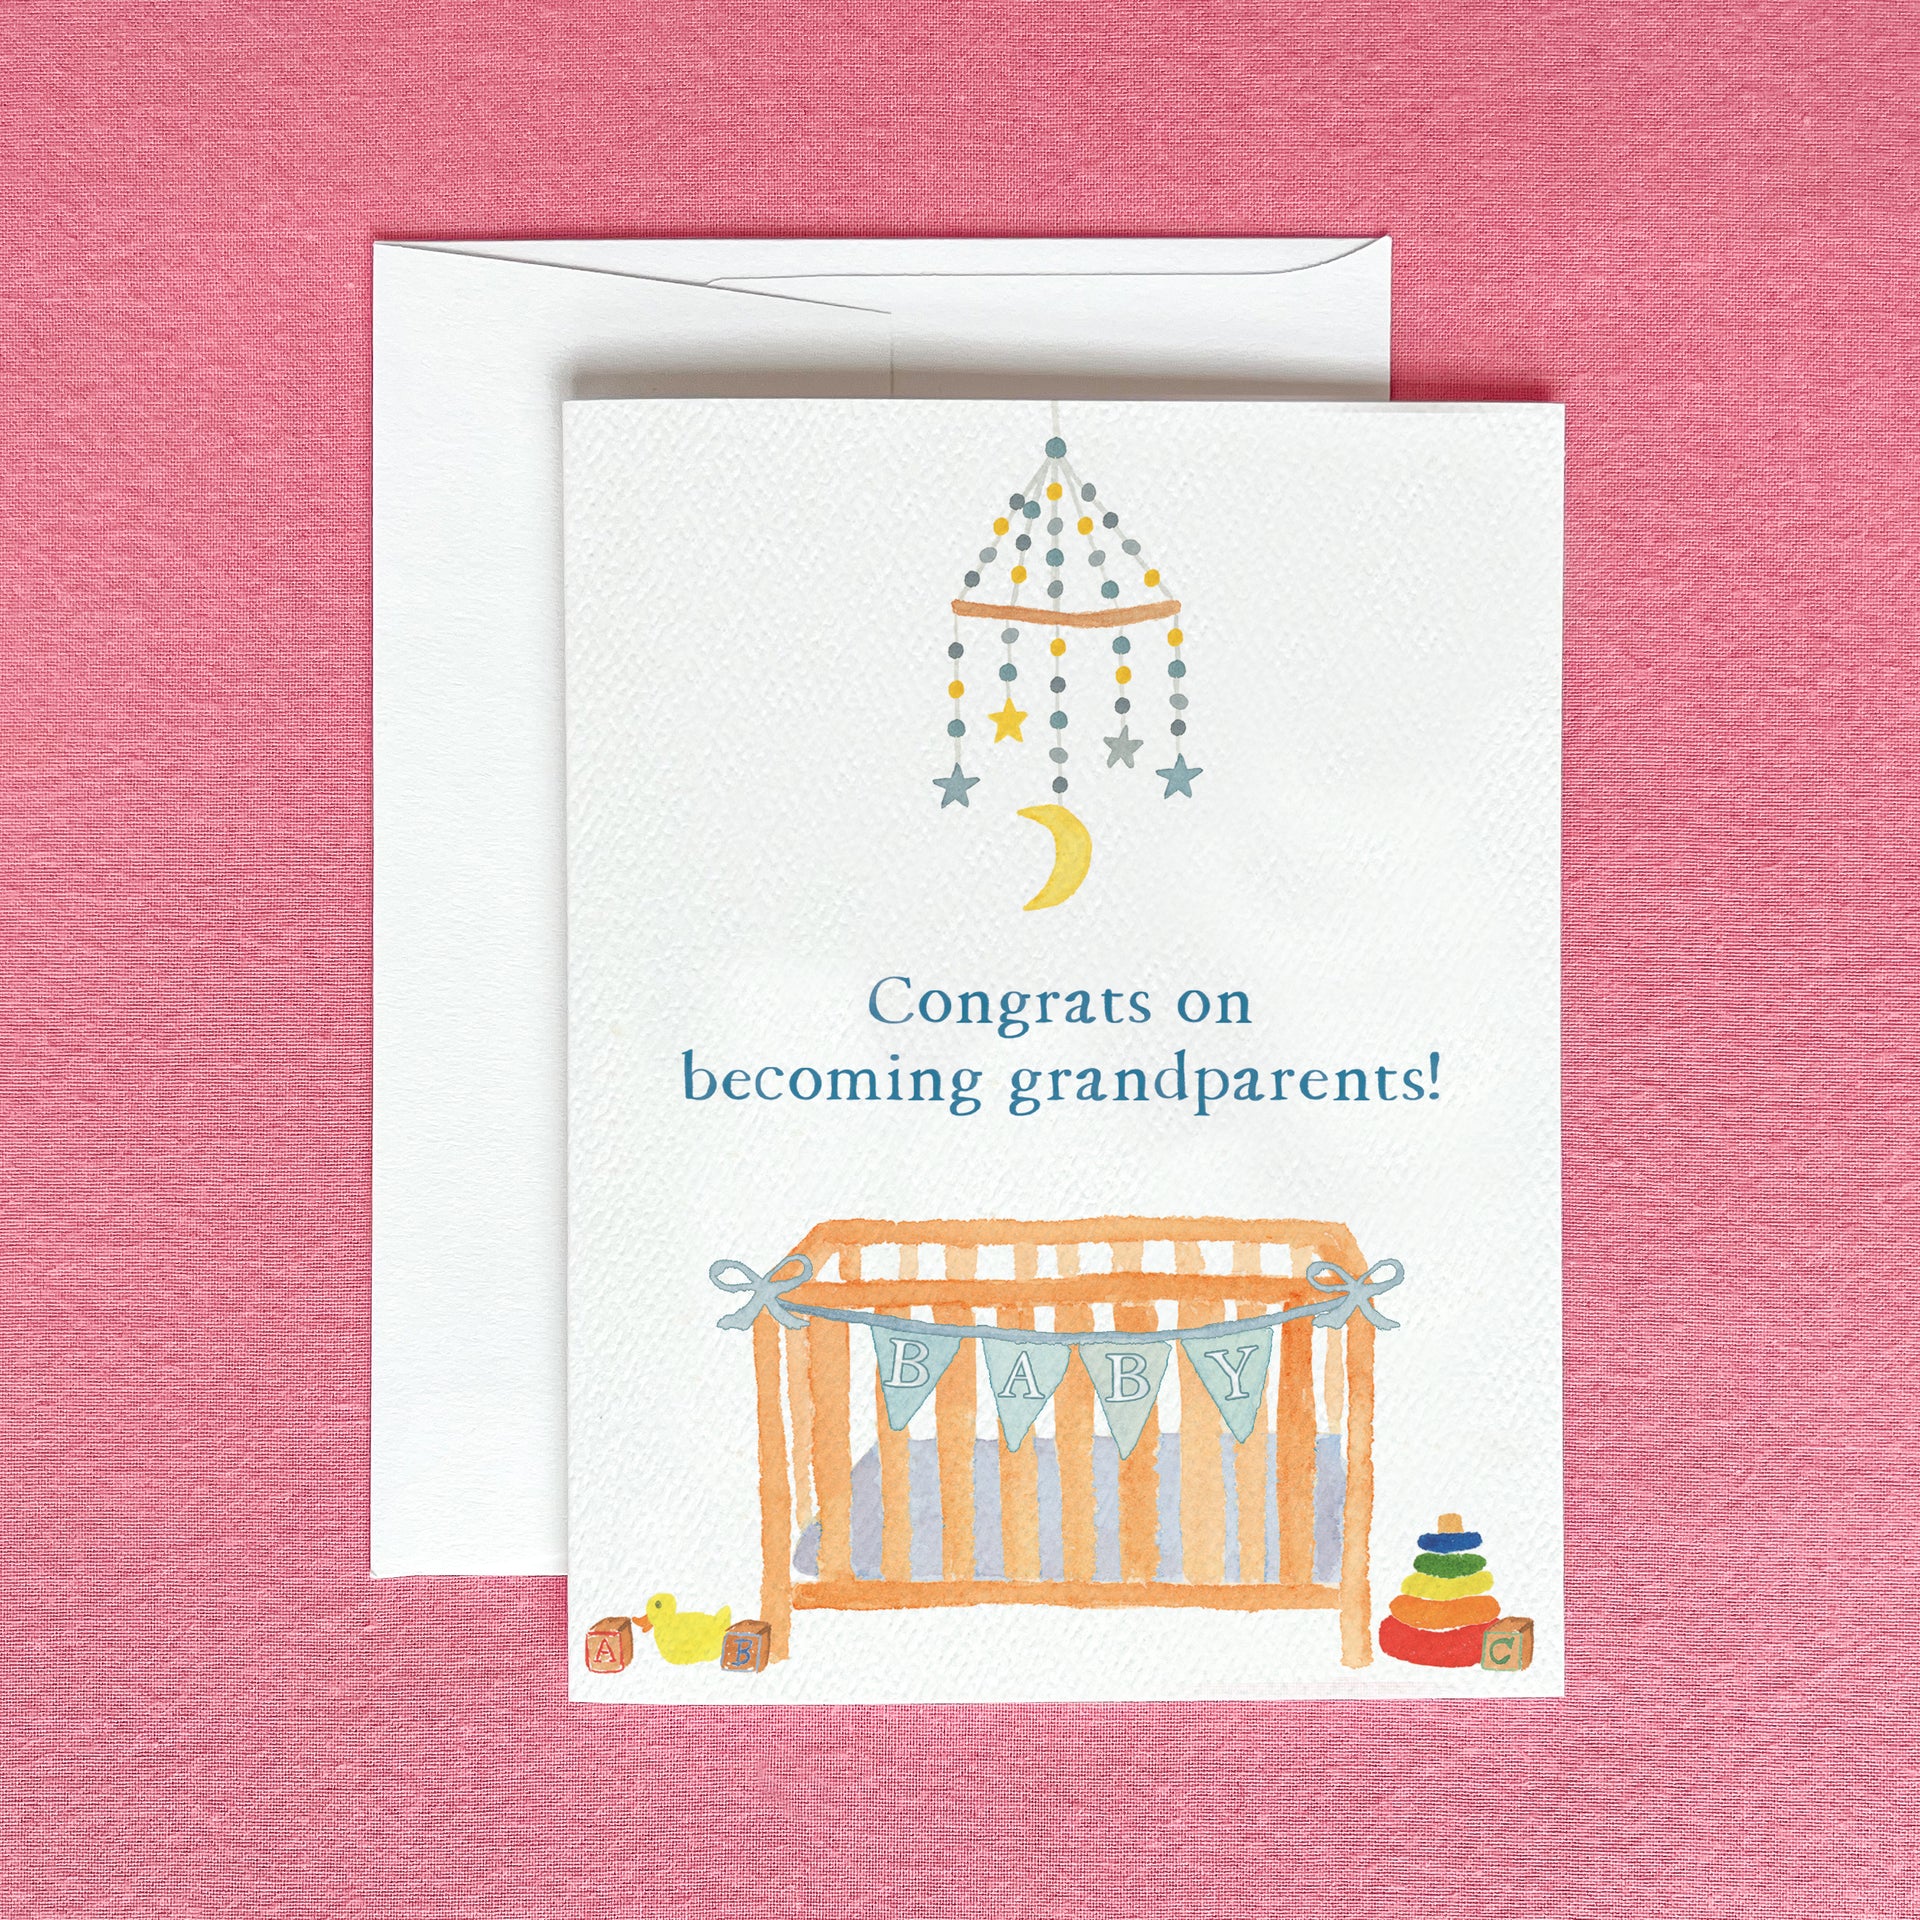 Congrats on Becoming Grandparents Greeting Card by Gert & Co